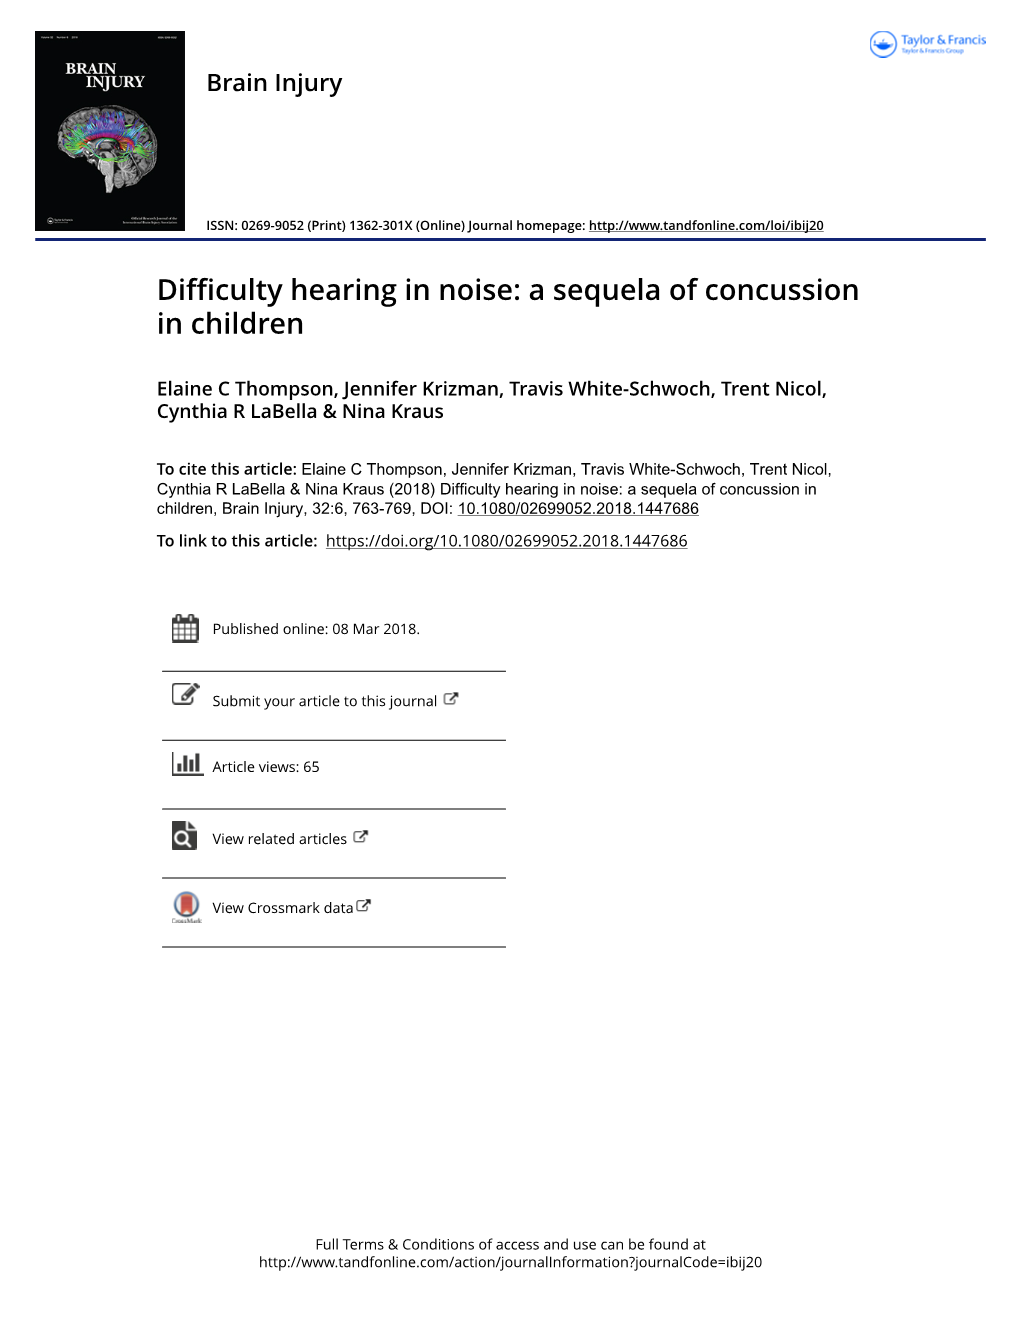 Difficulty Hearing in Noise: a Sequela of Concussion in Children